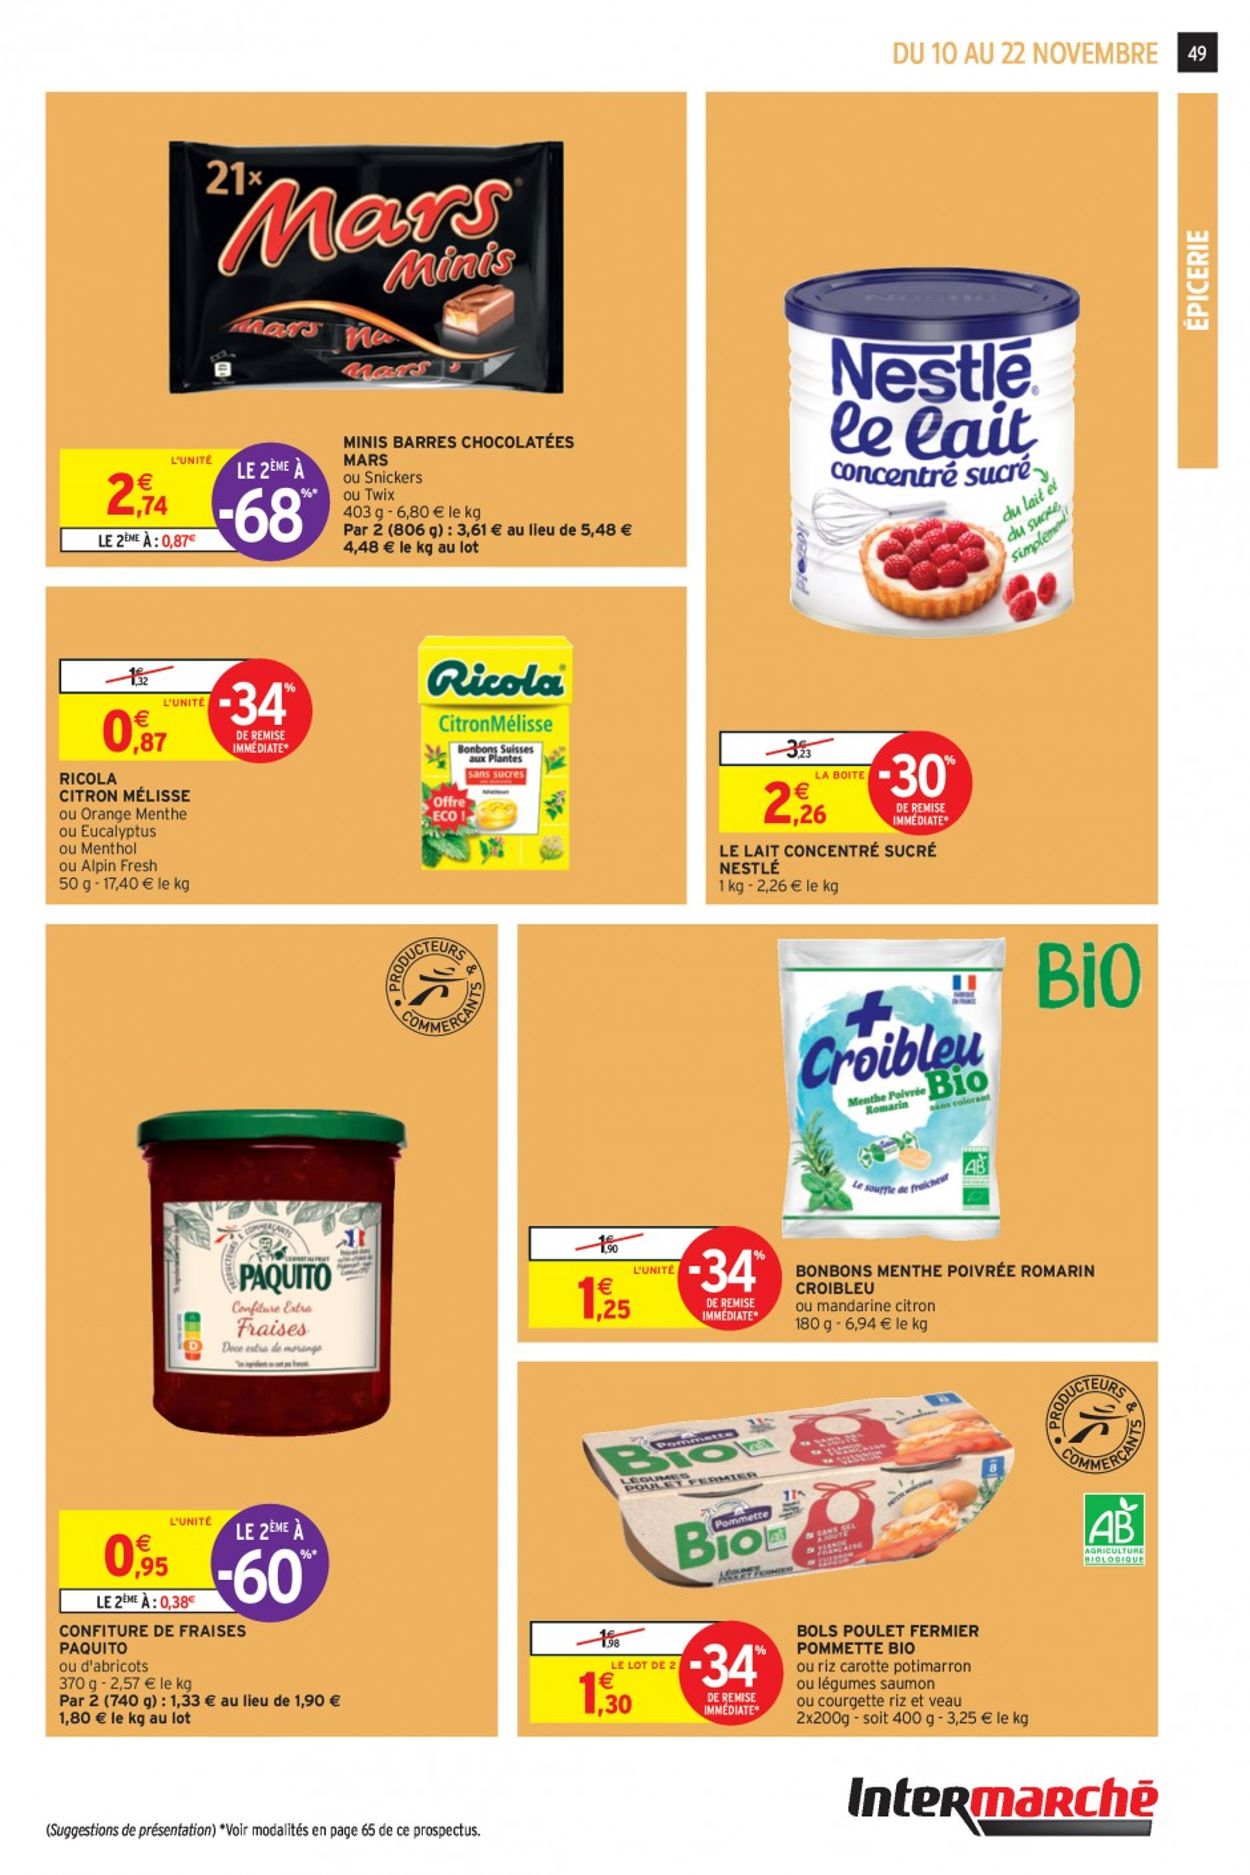 Intermarché Black Friday 2020 Catalogue - 10.11-22.11.2020 (Page 49)